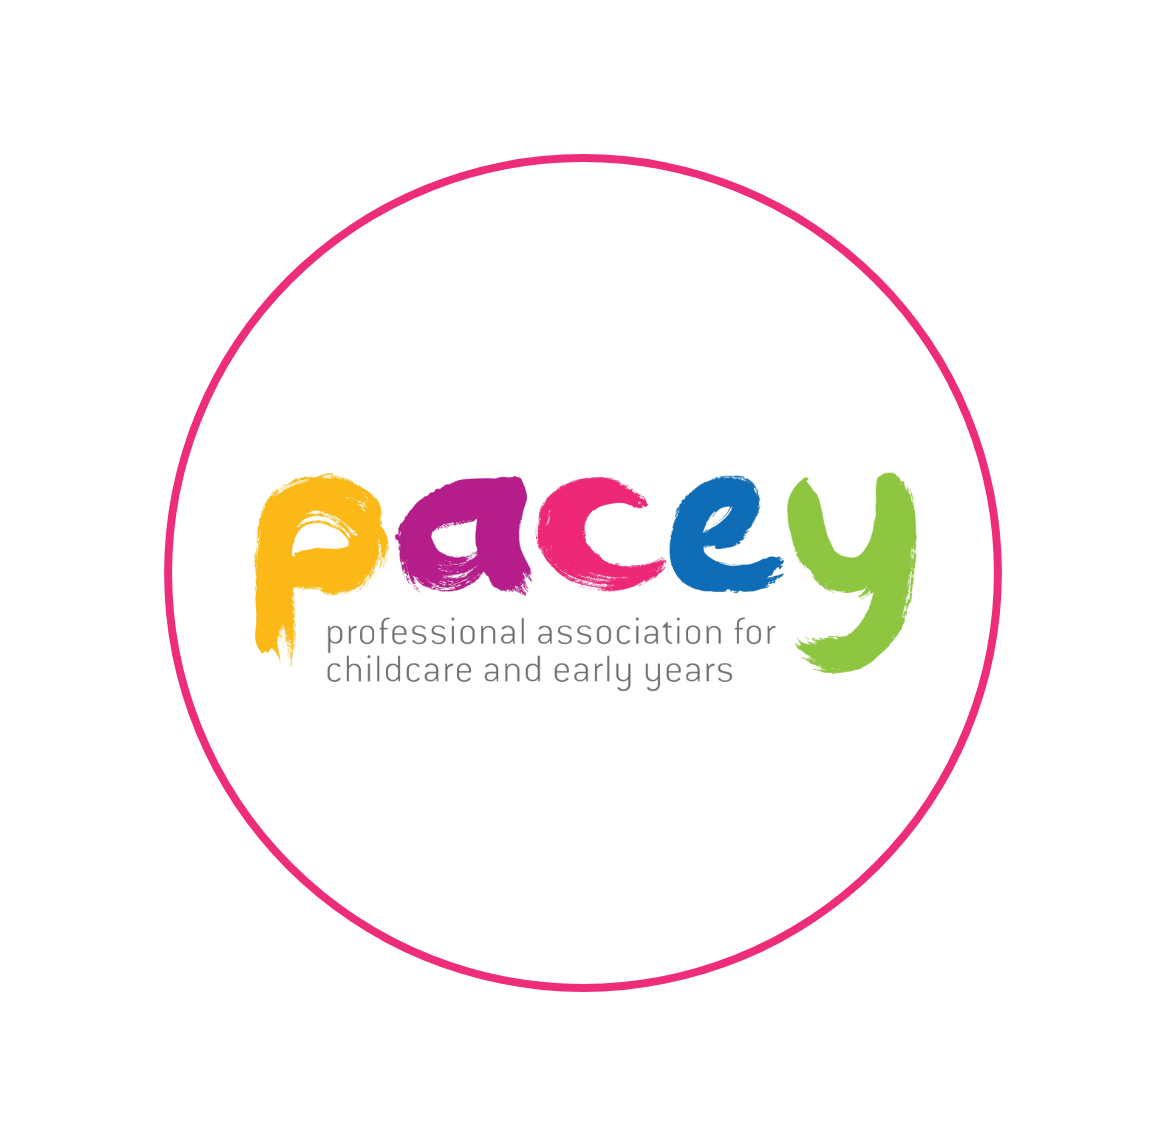 PACEY logo in roundel with frame